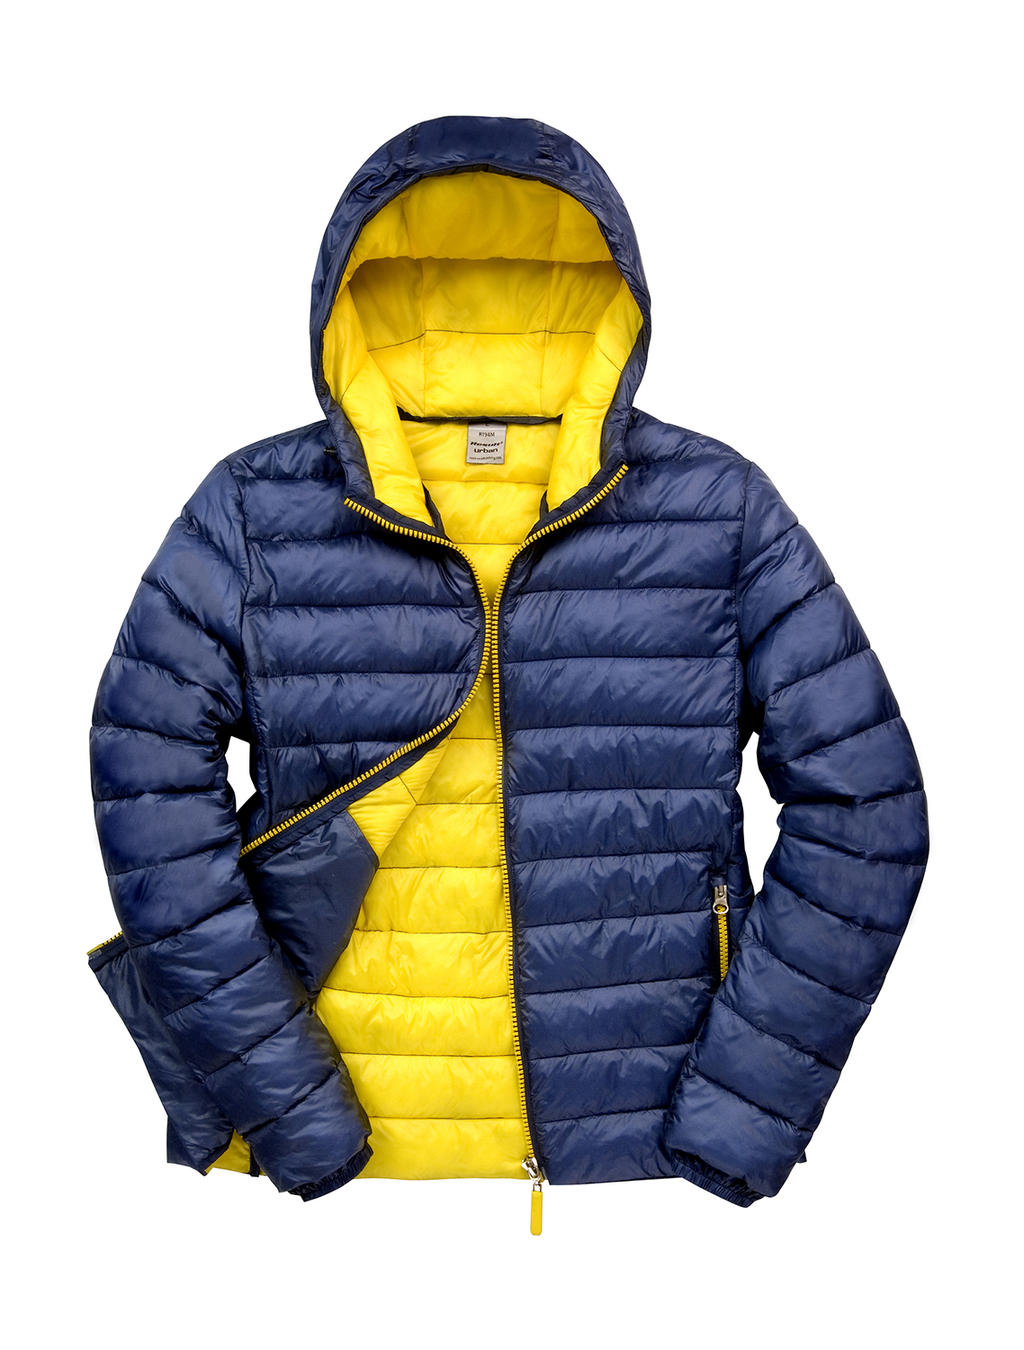  Snow Bird Hooded Jacket in Farbe Navy/Yellow